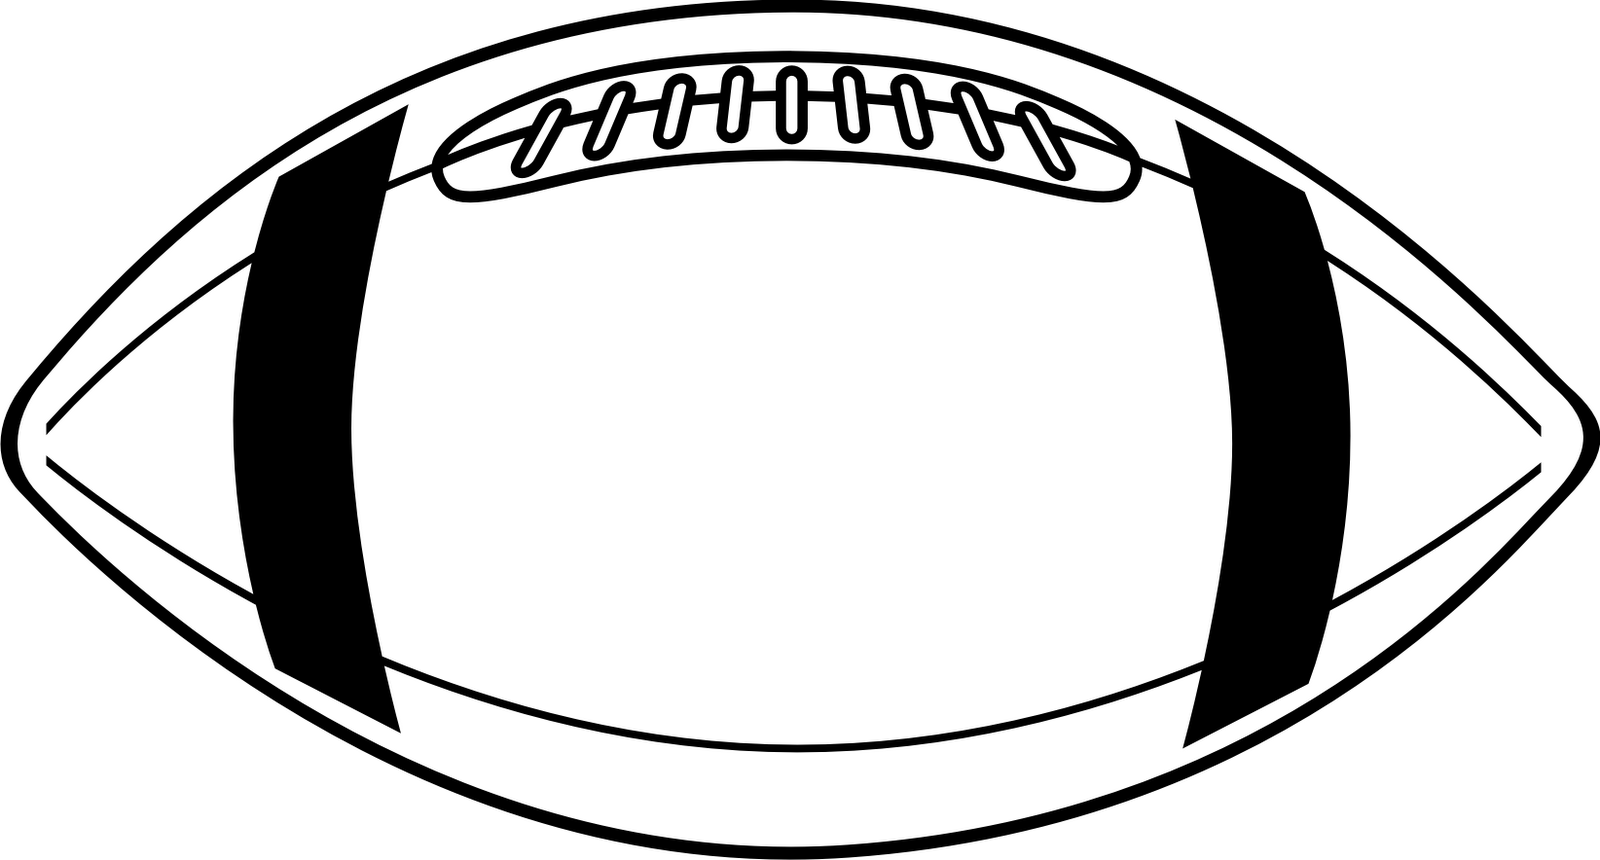 Football jersey football fan clipart free clipart images